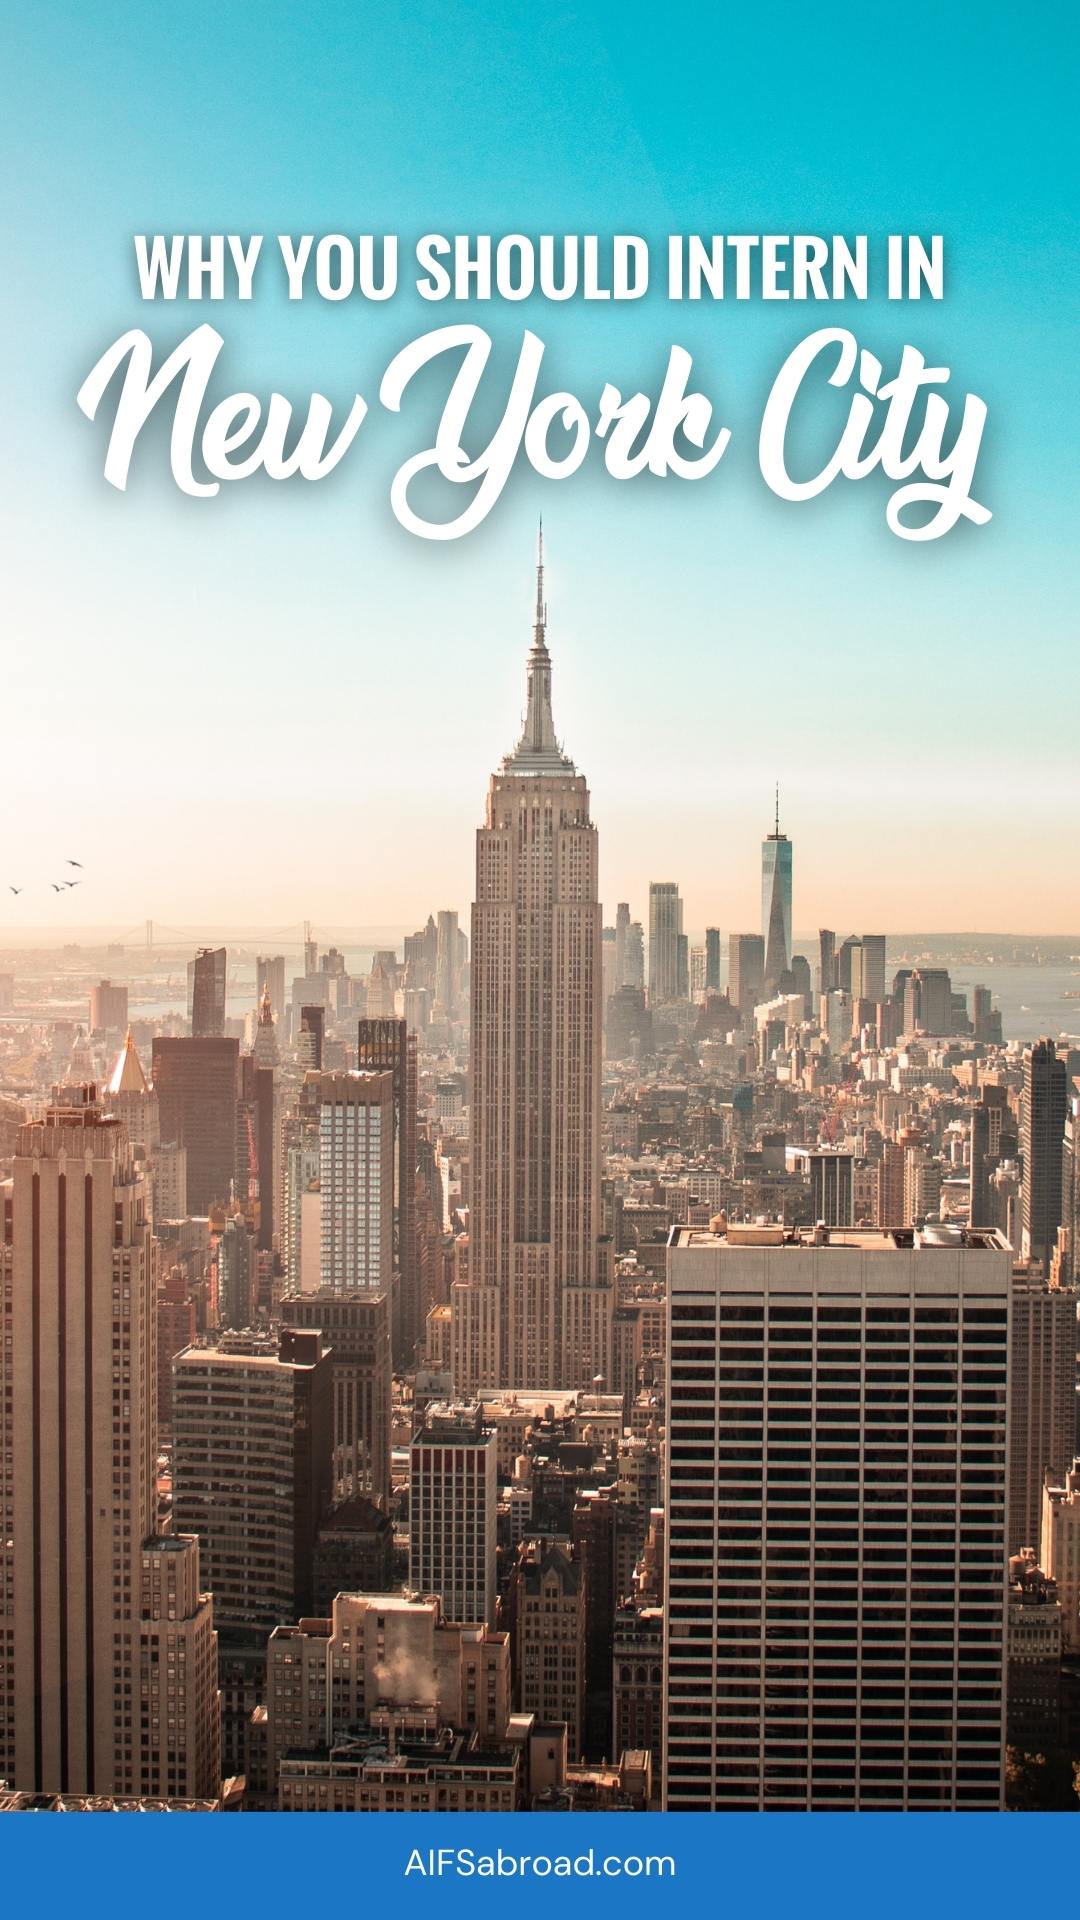 Pin image: View of Empire State Building and New York City downtown with text "why you should do an internship in new york city"